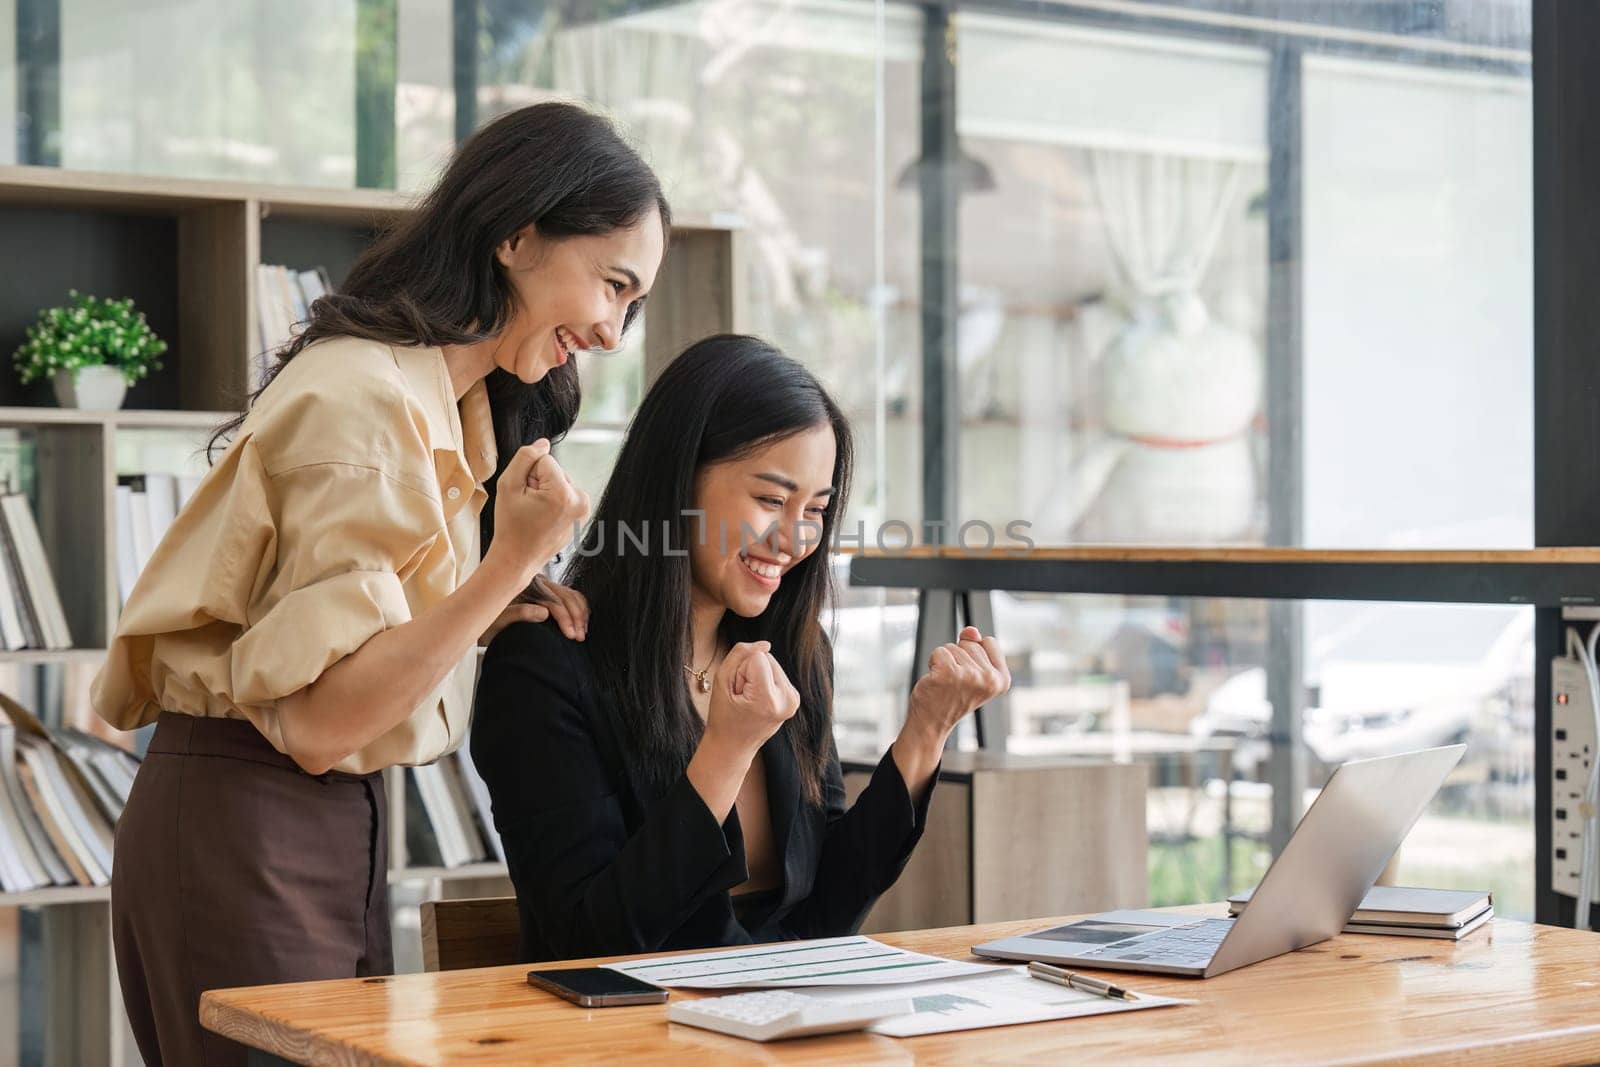 Two young businesswomen show joyful expression of success at work smiling happily with a laptop computer in a modern office.